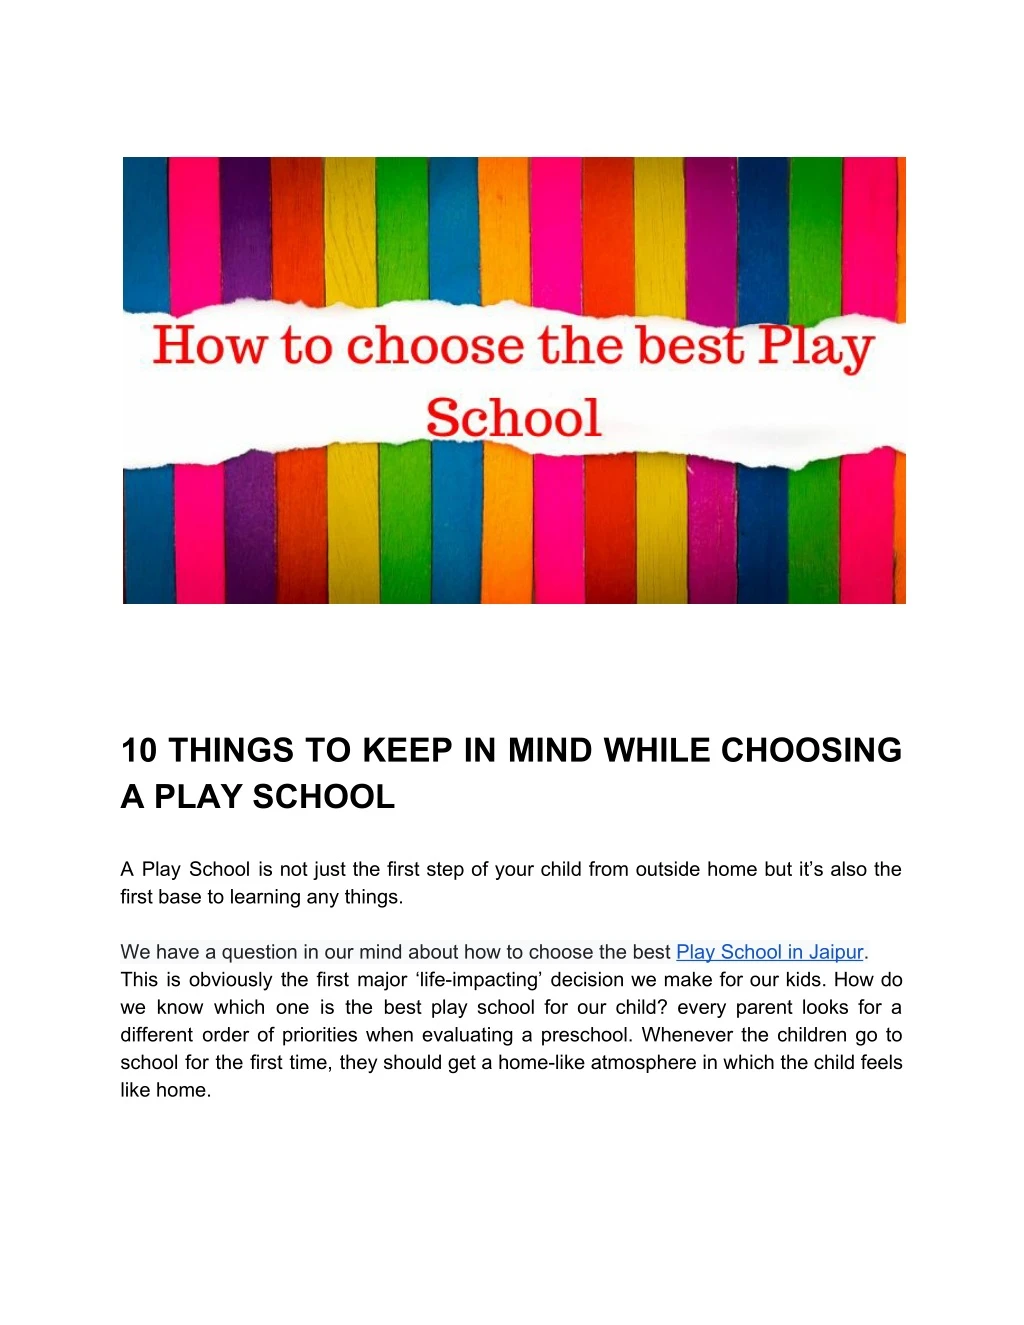 10 things to keep in mind while choosing a play